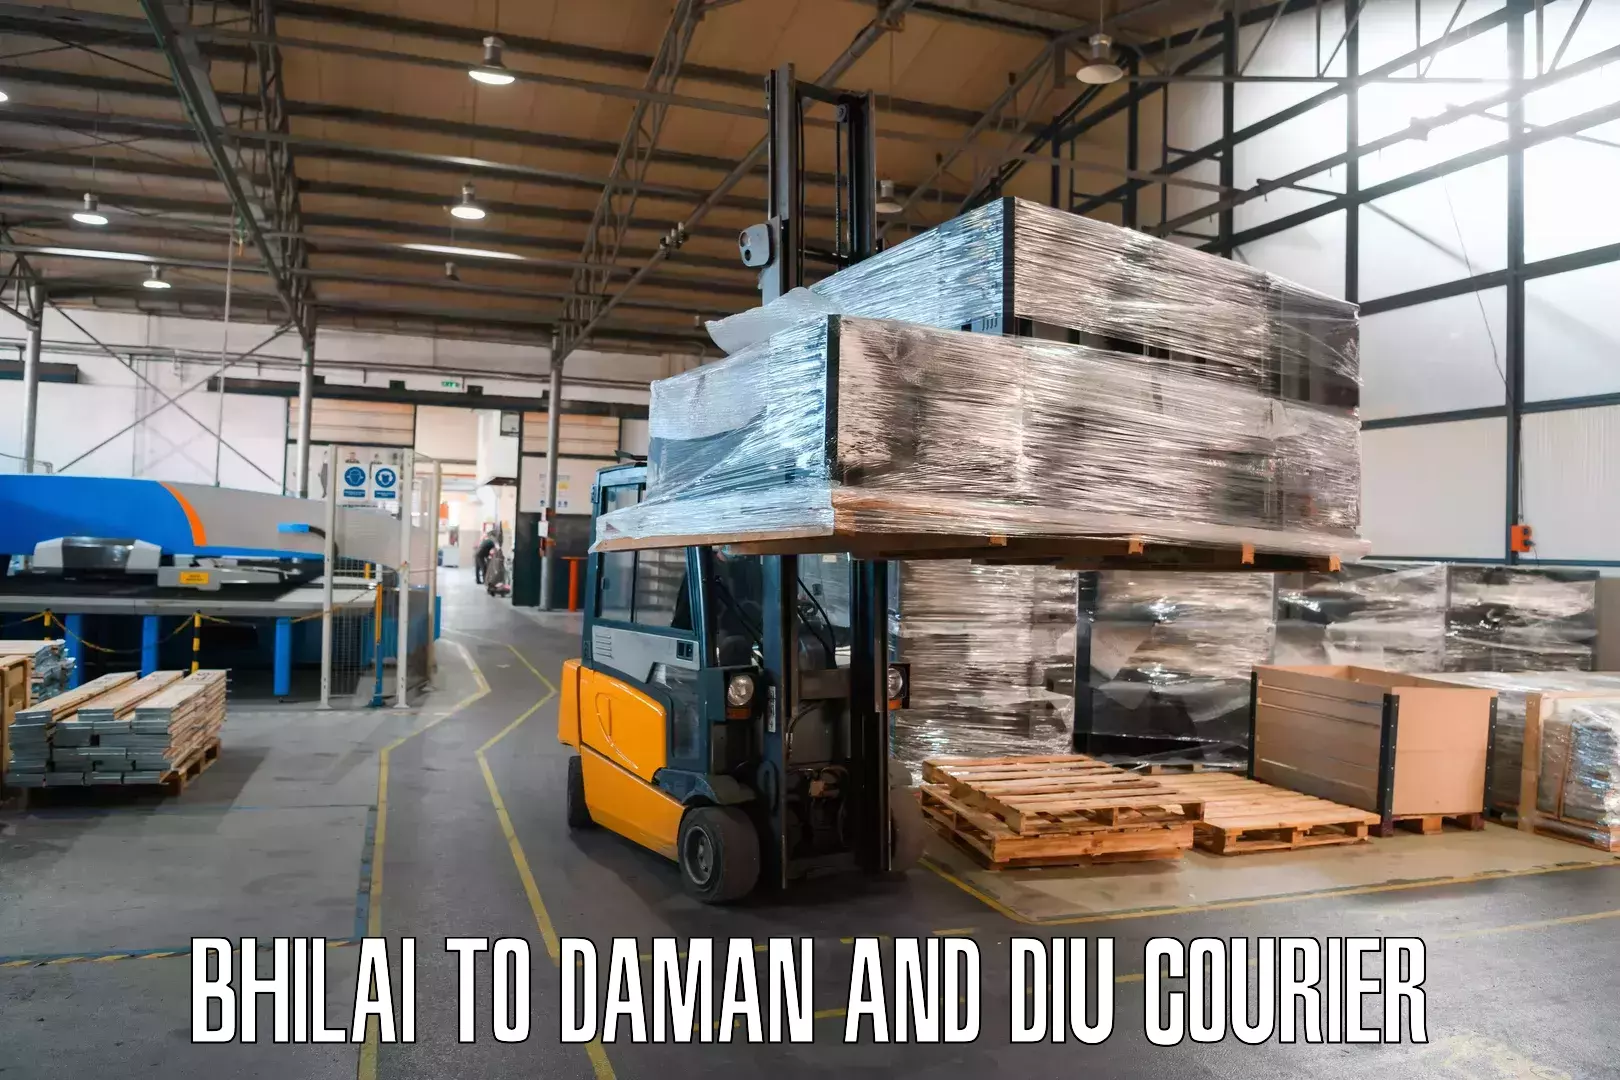 Courier service efficiency Bhilai to Diu